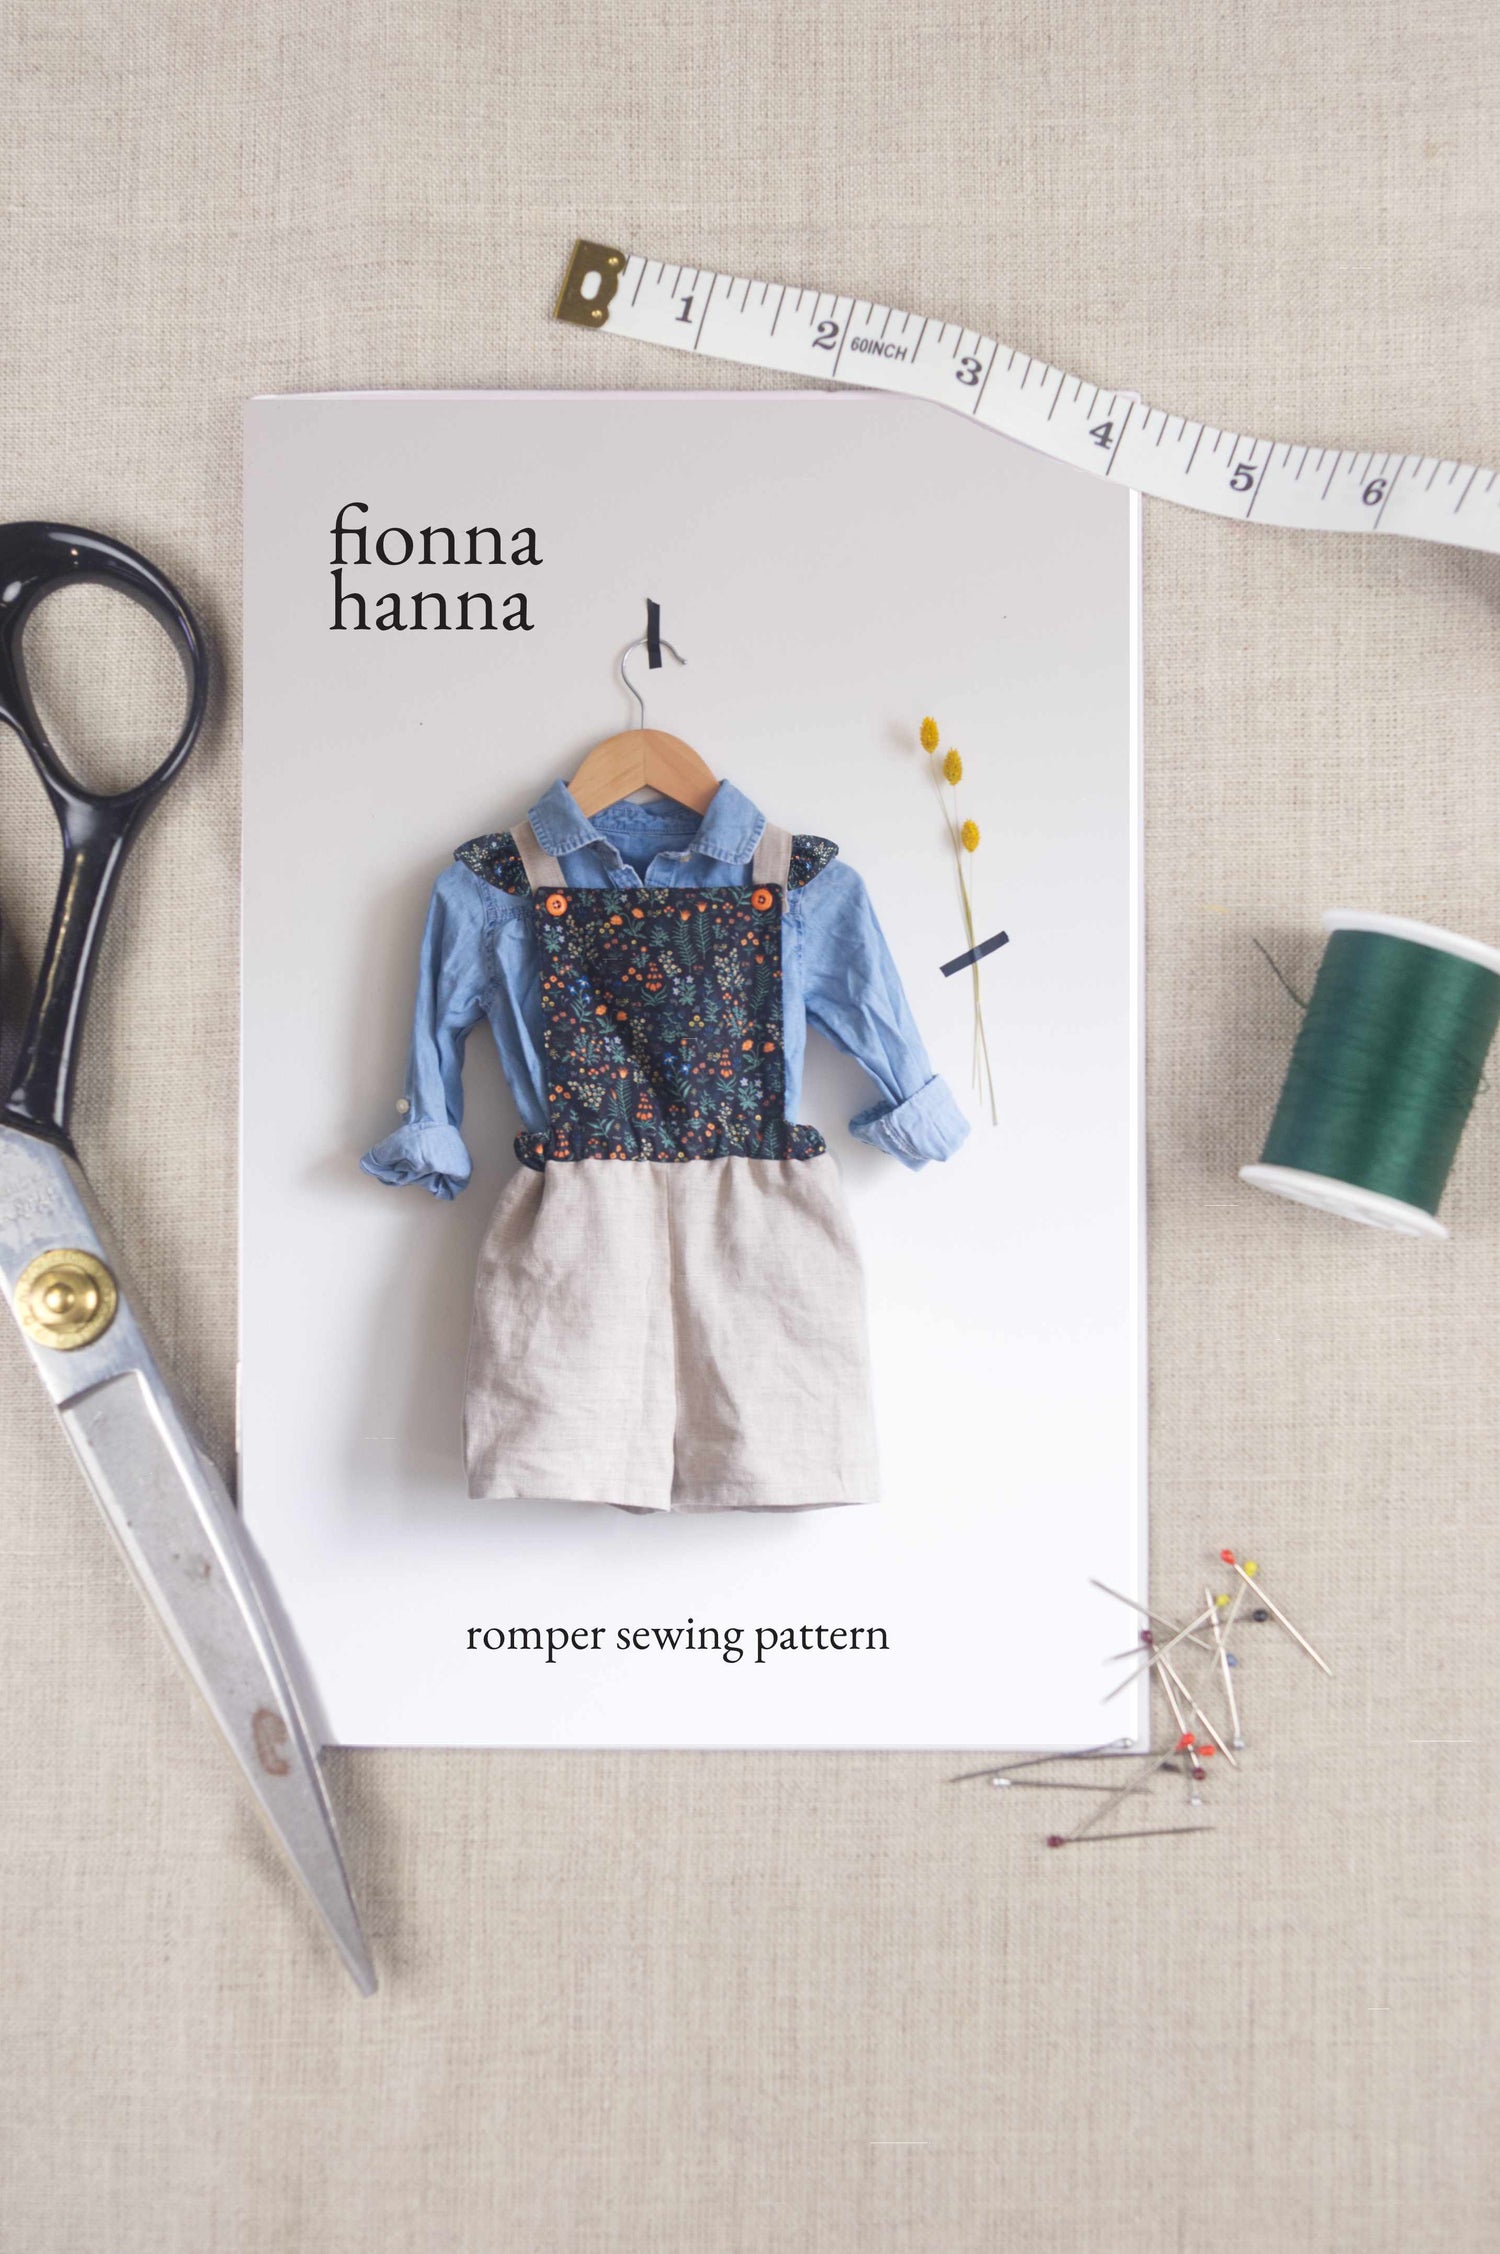 children's sewing patterns layout with a pattern, scissors and pins